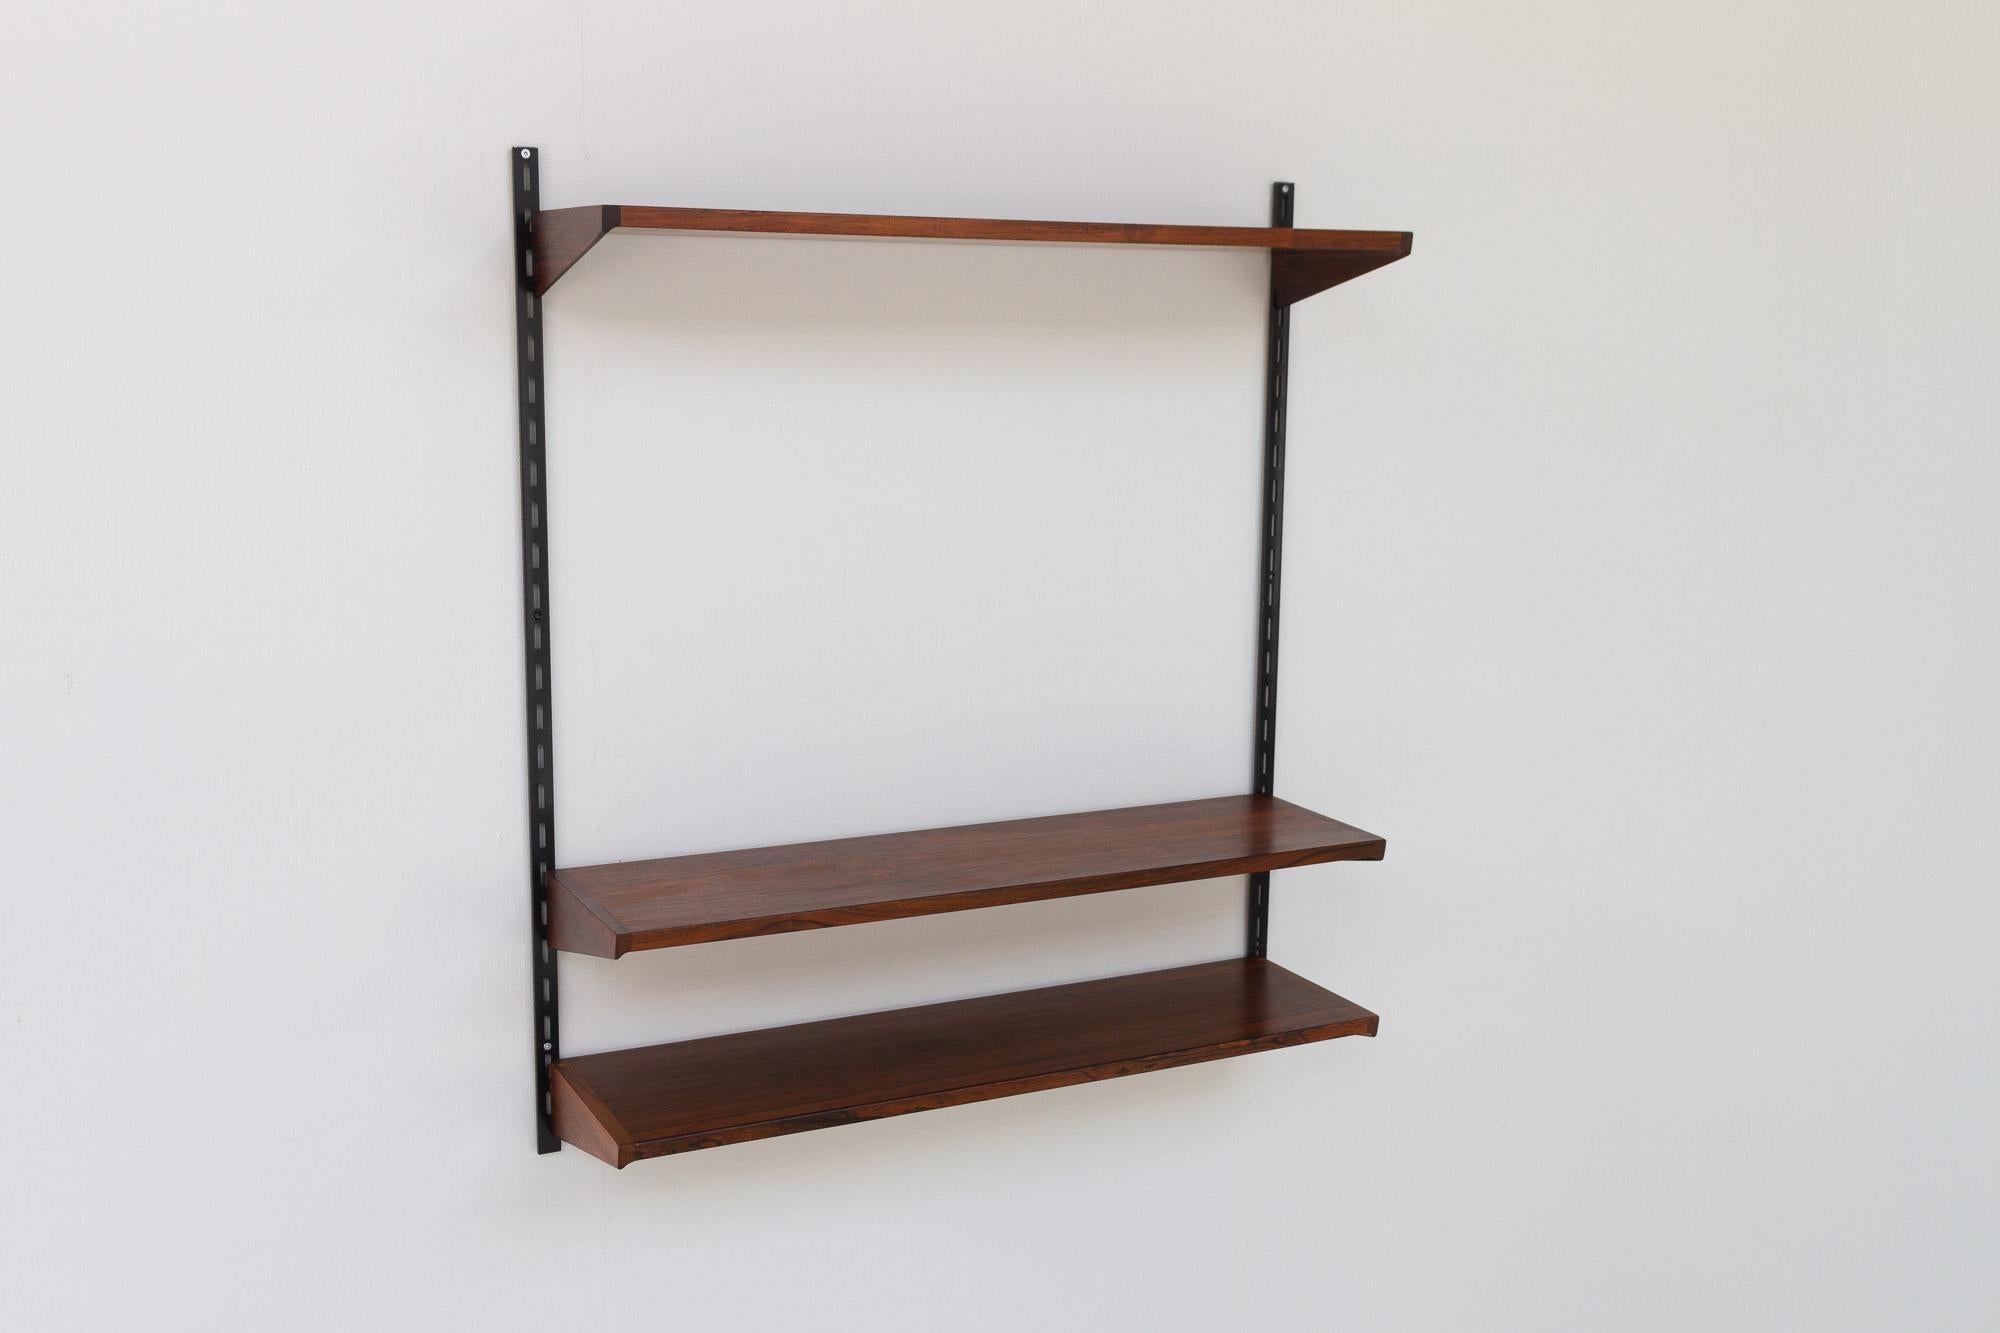 Mid-20th Century Vintage Danish Rosewood Wall Unit by Kai Kristiansen for FM, 1960s For Sale